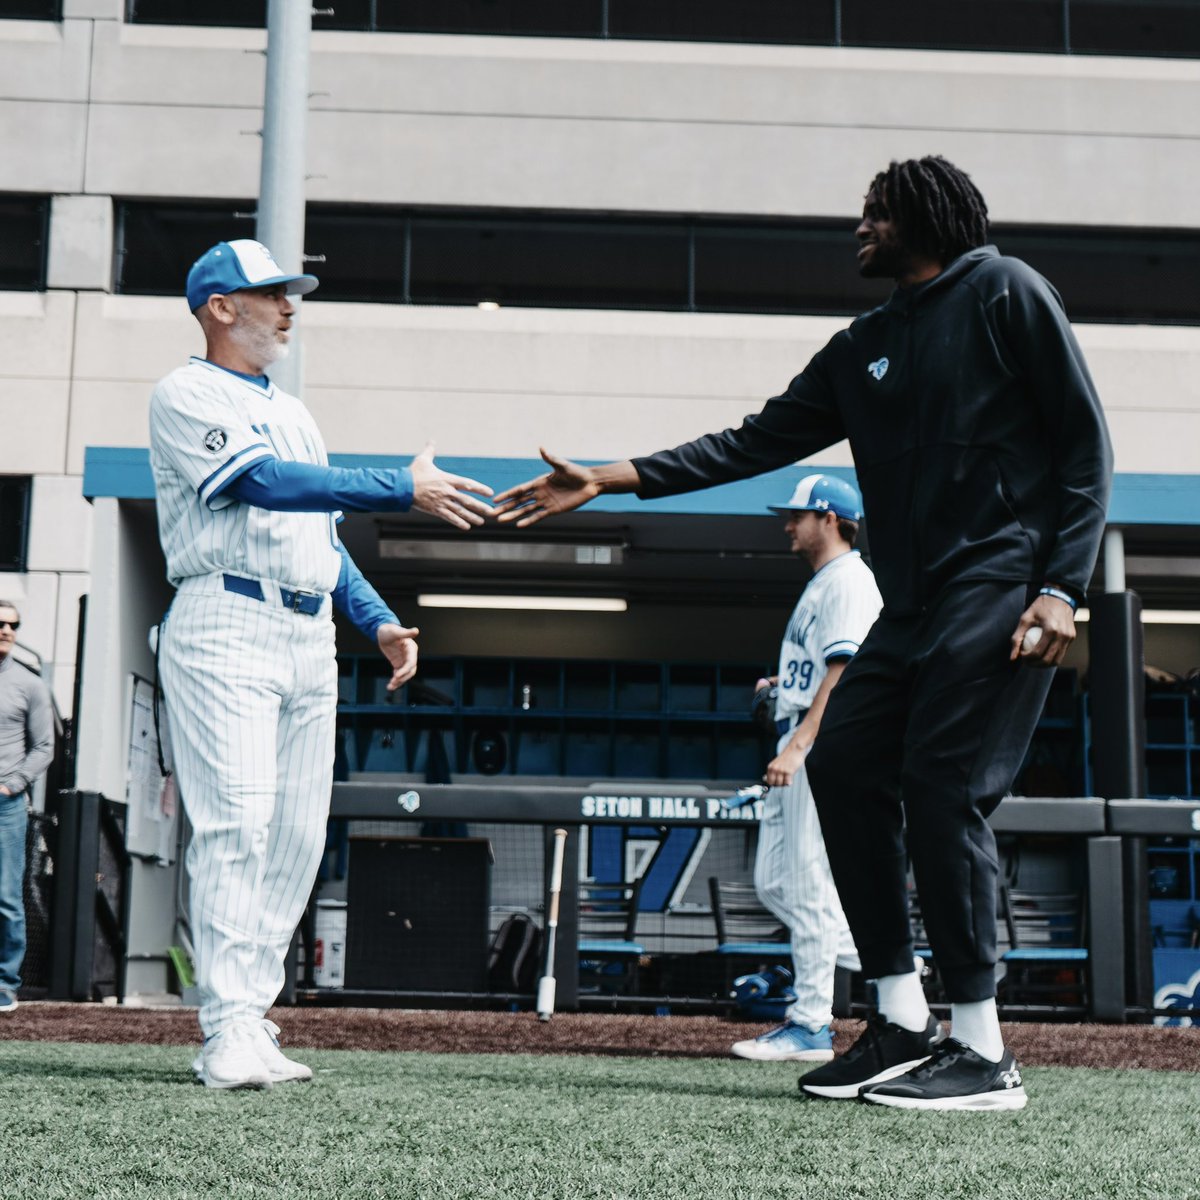 Special thanks to @JadenSayNoMore for showing love and throwing out our first pitch! #NeverLoseYourHustle | #HALLin 🔵🏴‍☠️⚪️